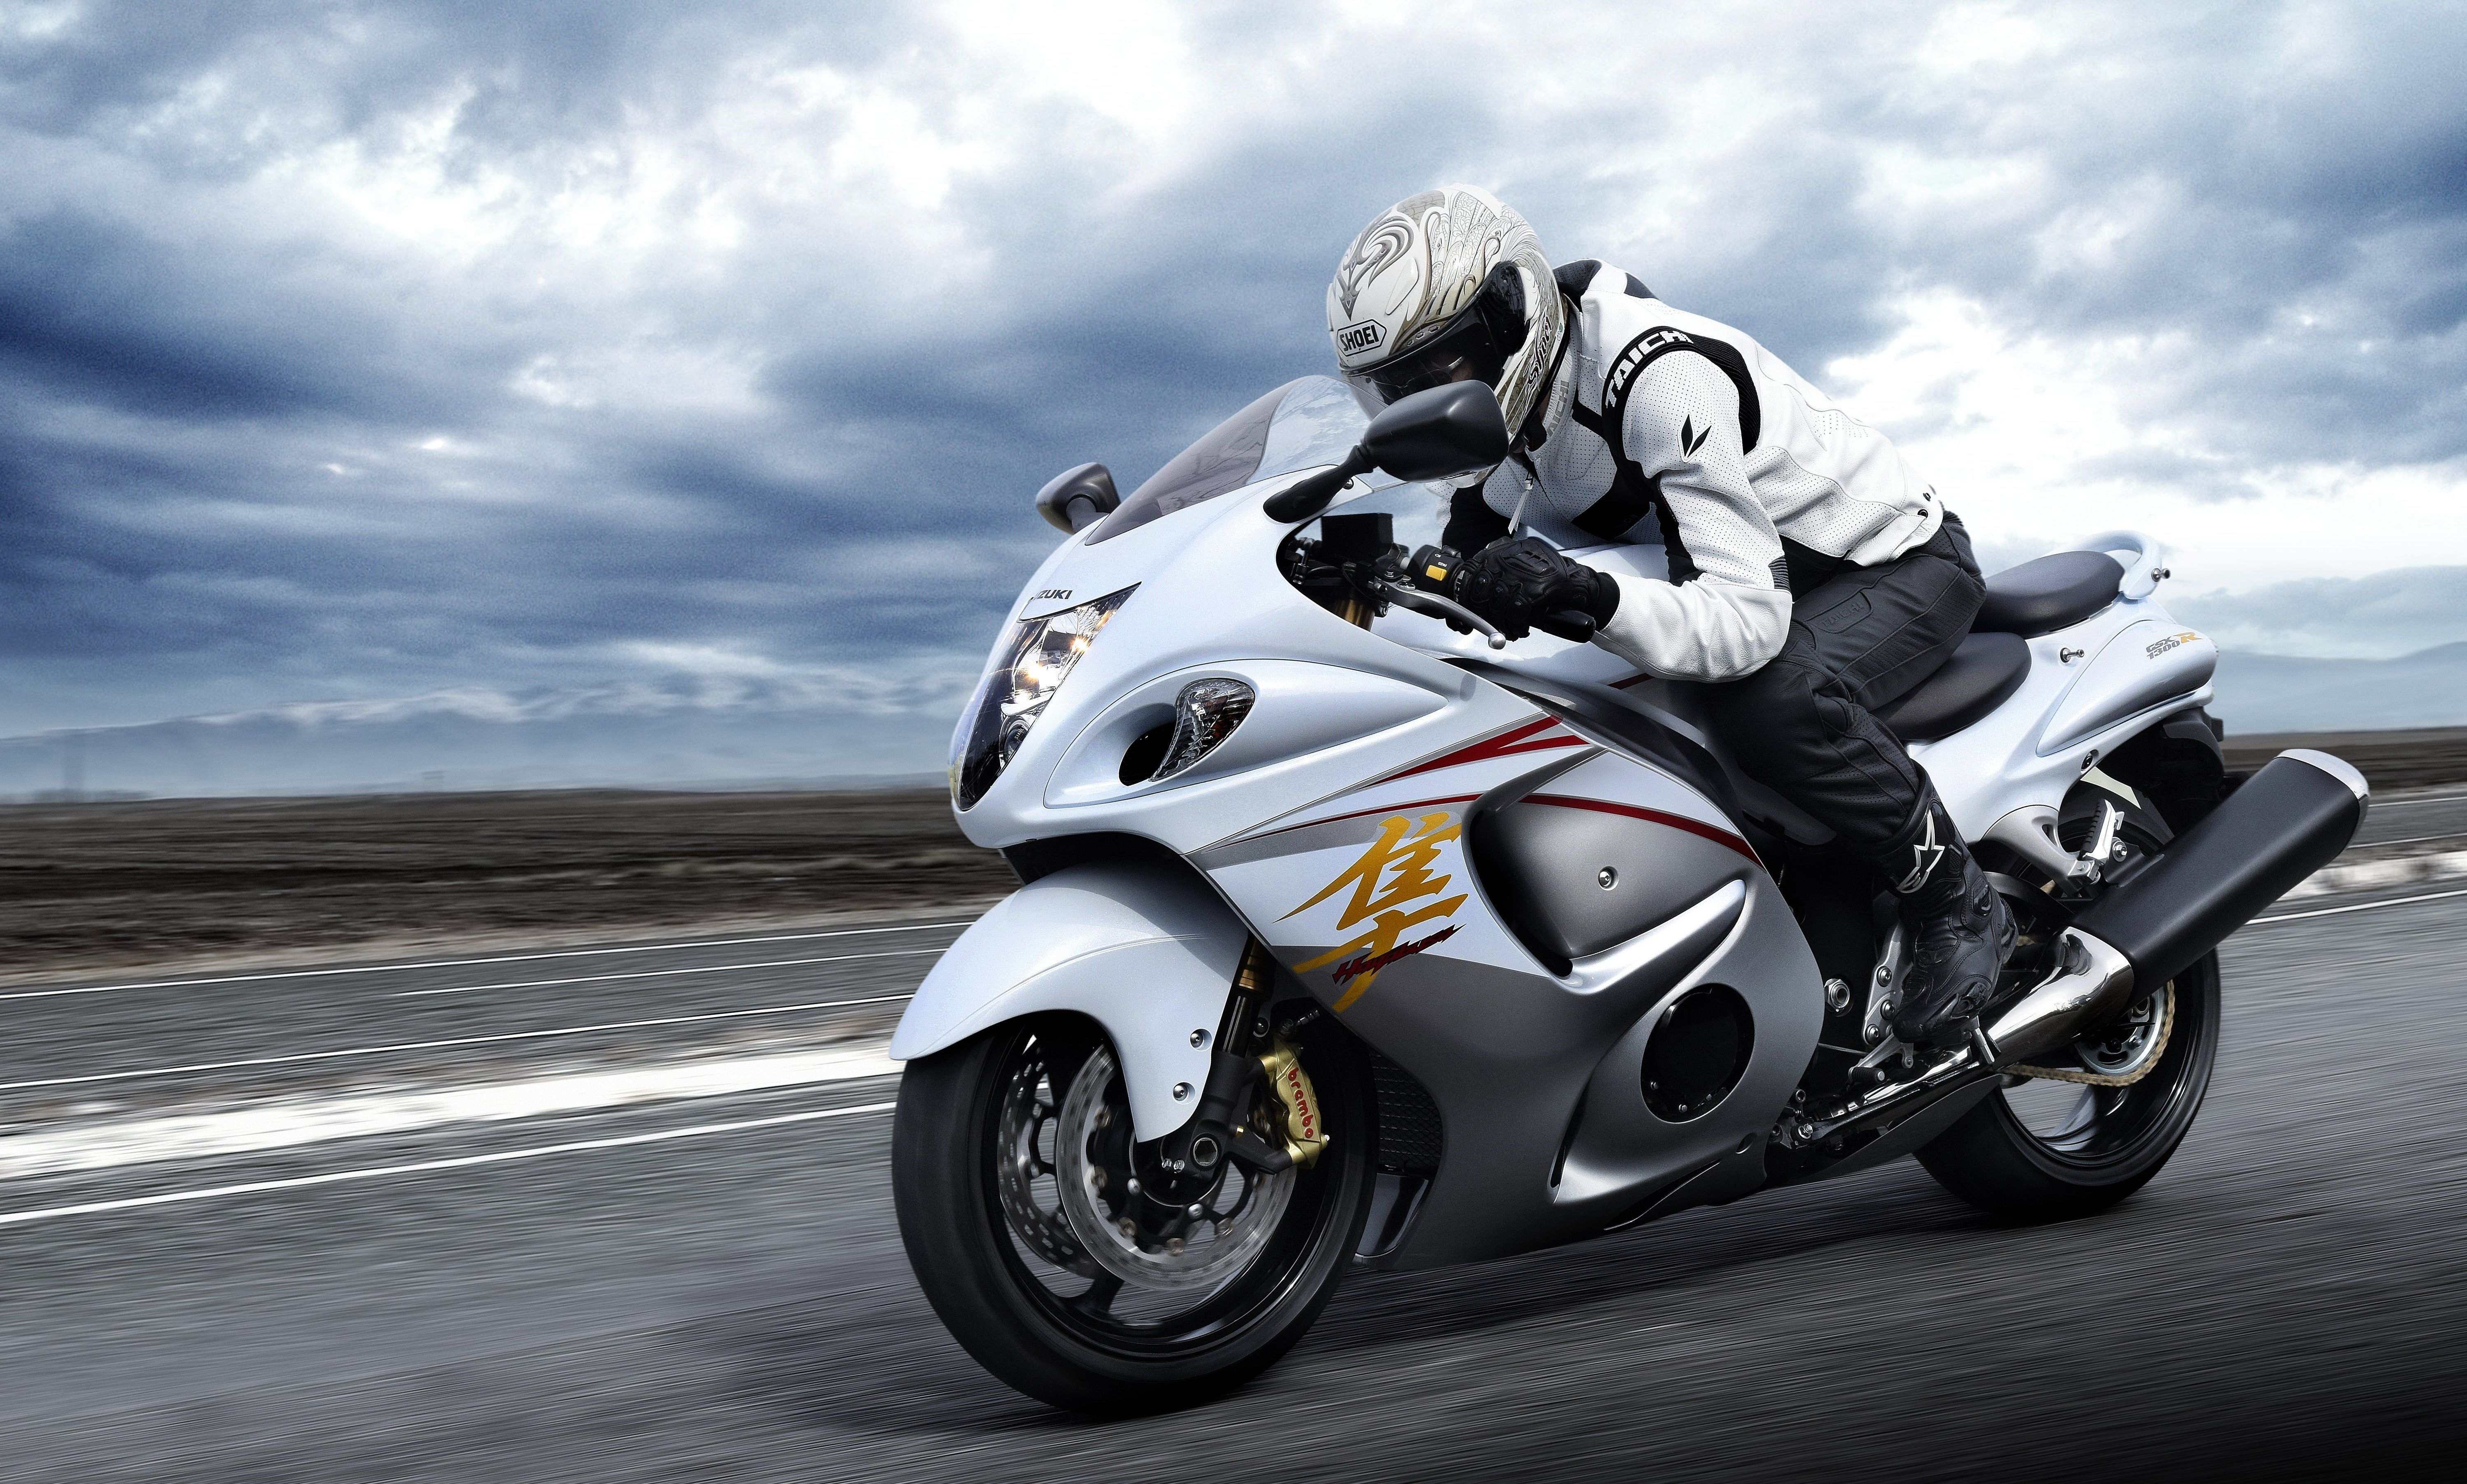 The GSX1300R is your last chance to own a Hayabusa before they go extinct